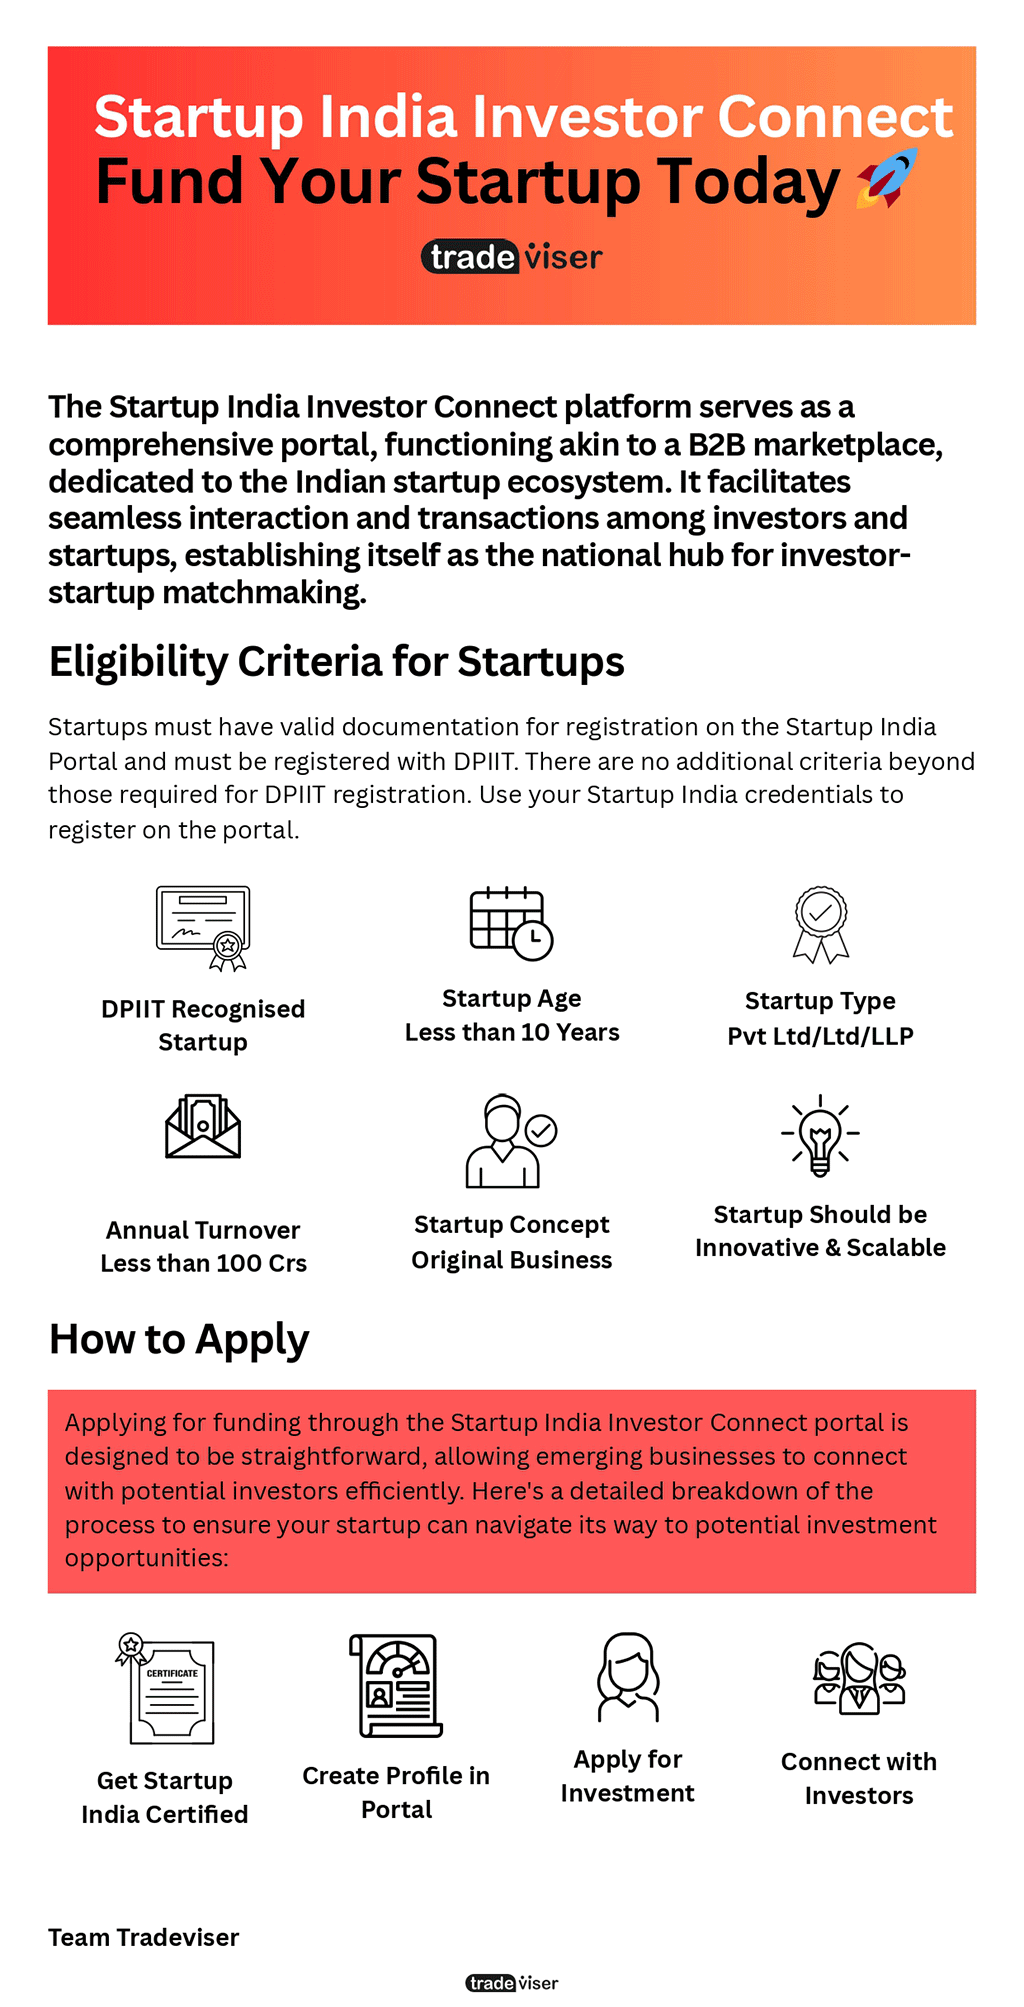 Startup India Investor, Step-by-Step Guide to Applying for Funding through Startup India Investor Connect